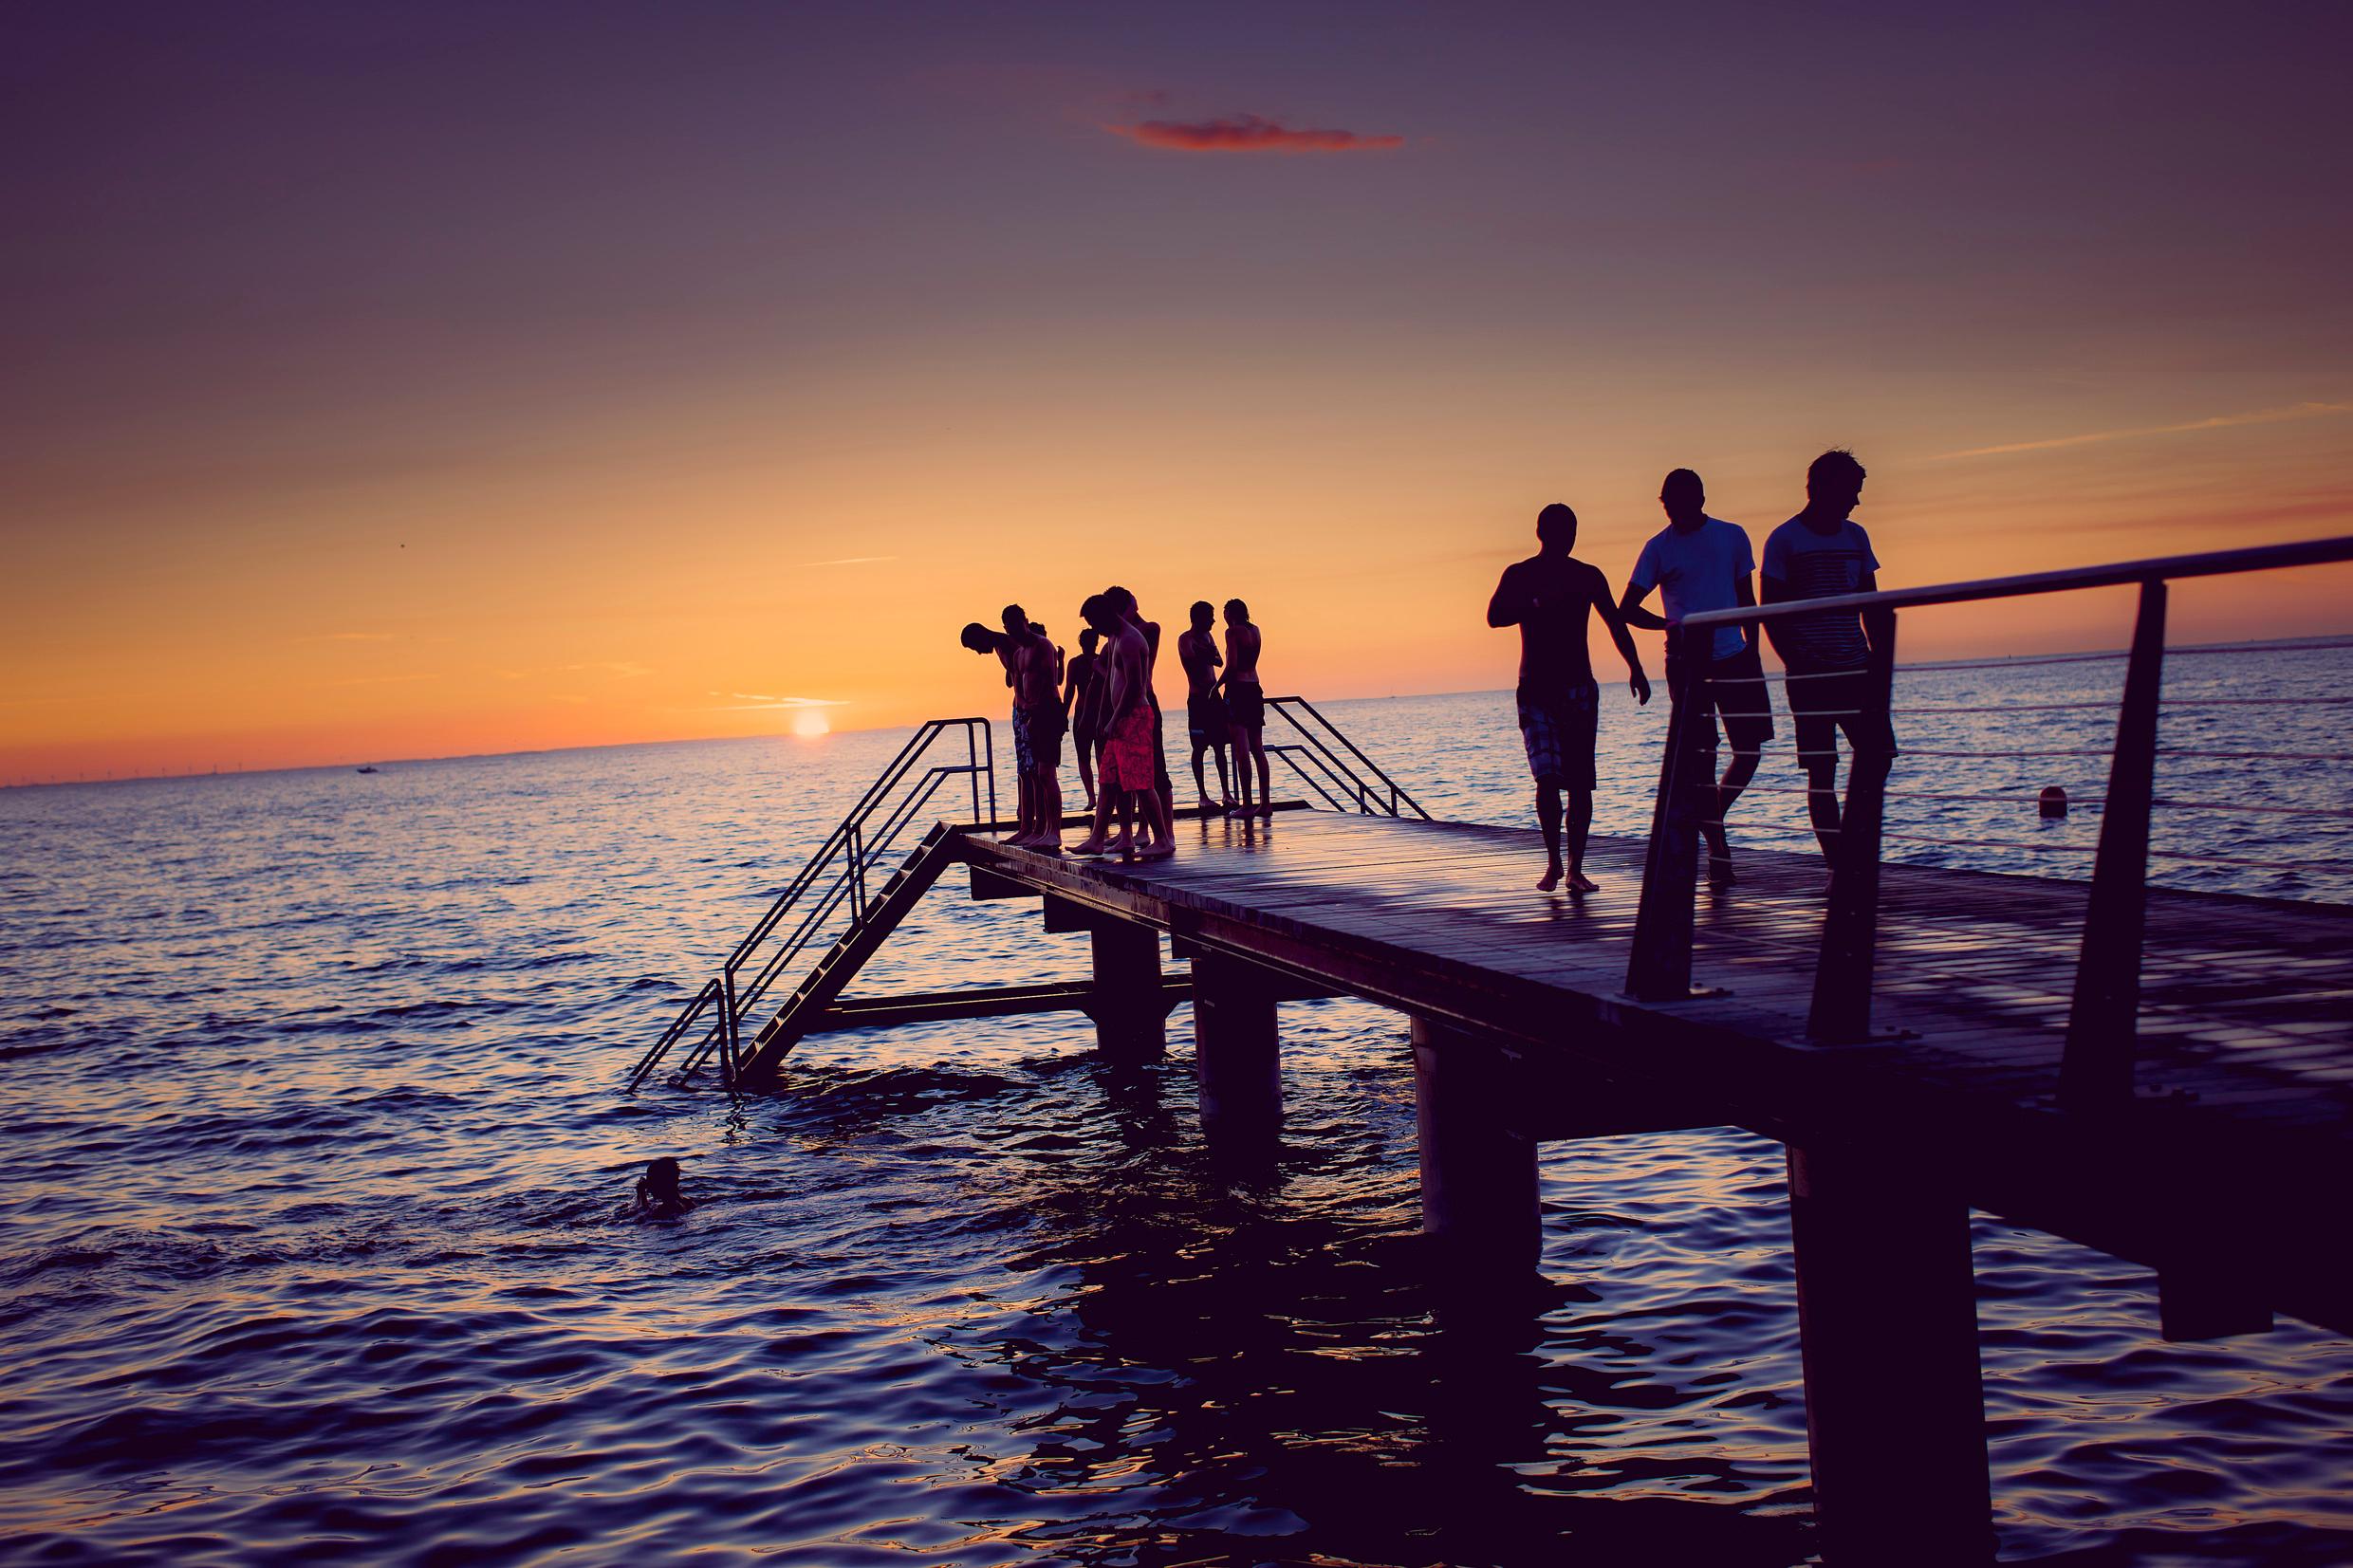 A group of people are standing on a pier in Sweden during sunset. Some are looking down on a person swimming.